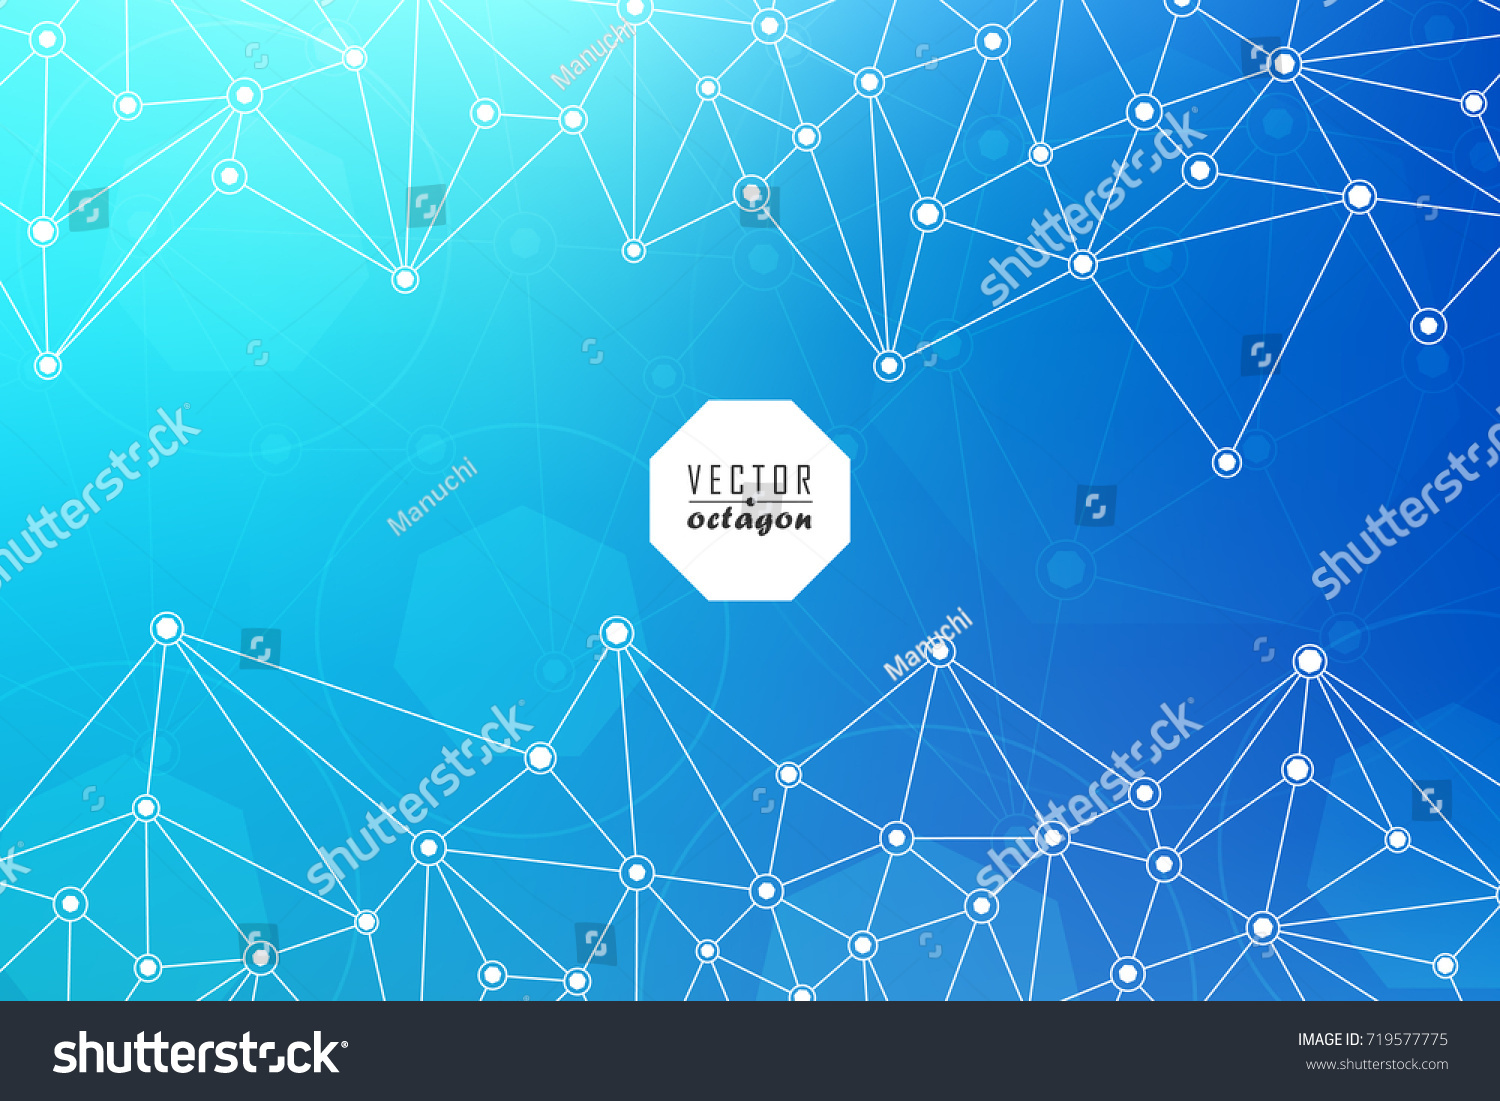 Octagon Background Geometric Shapes Triangles Points Stock Vector